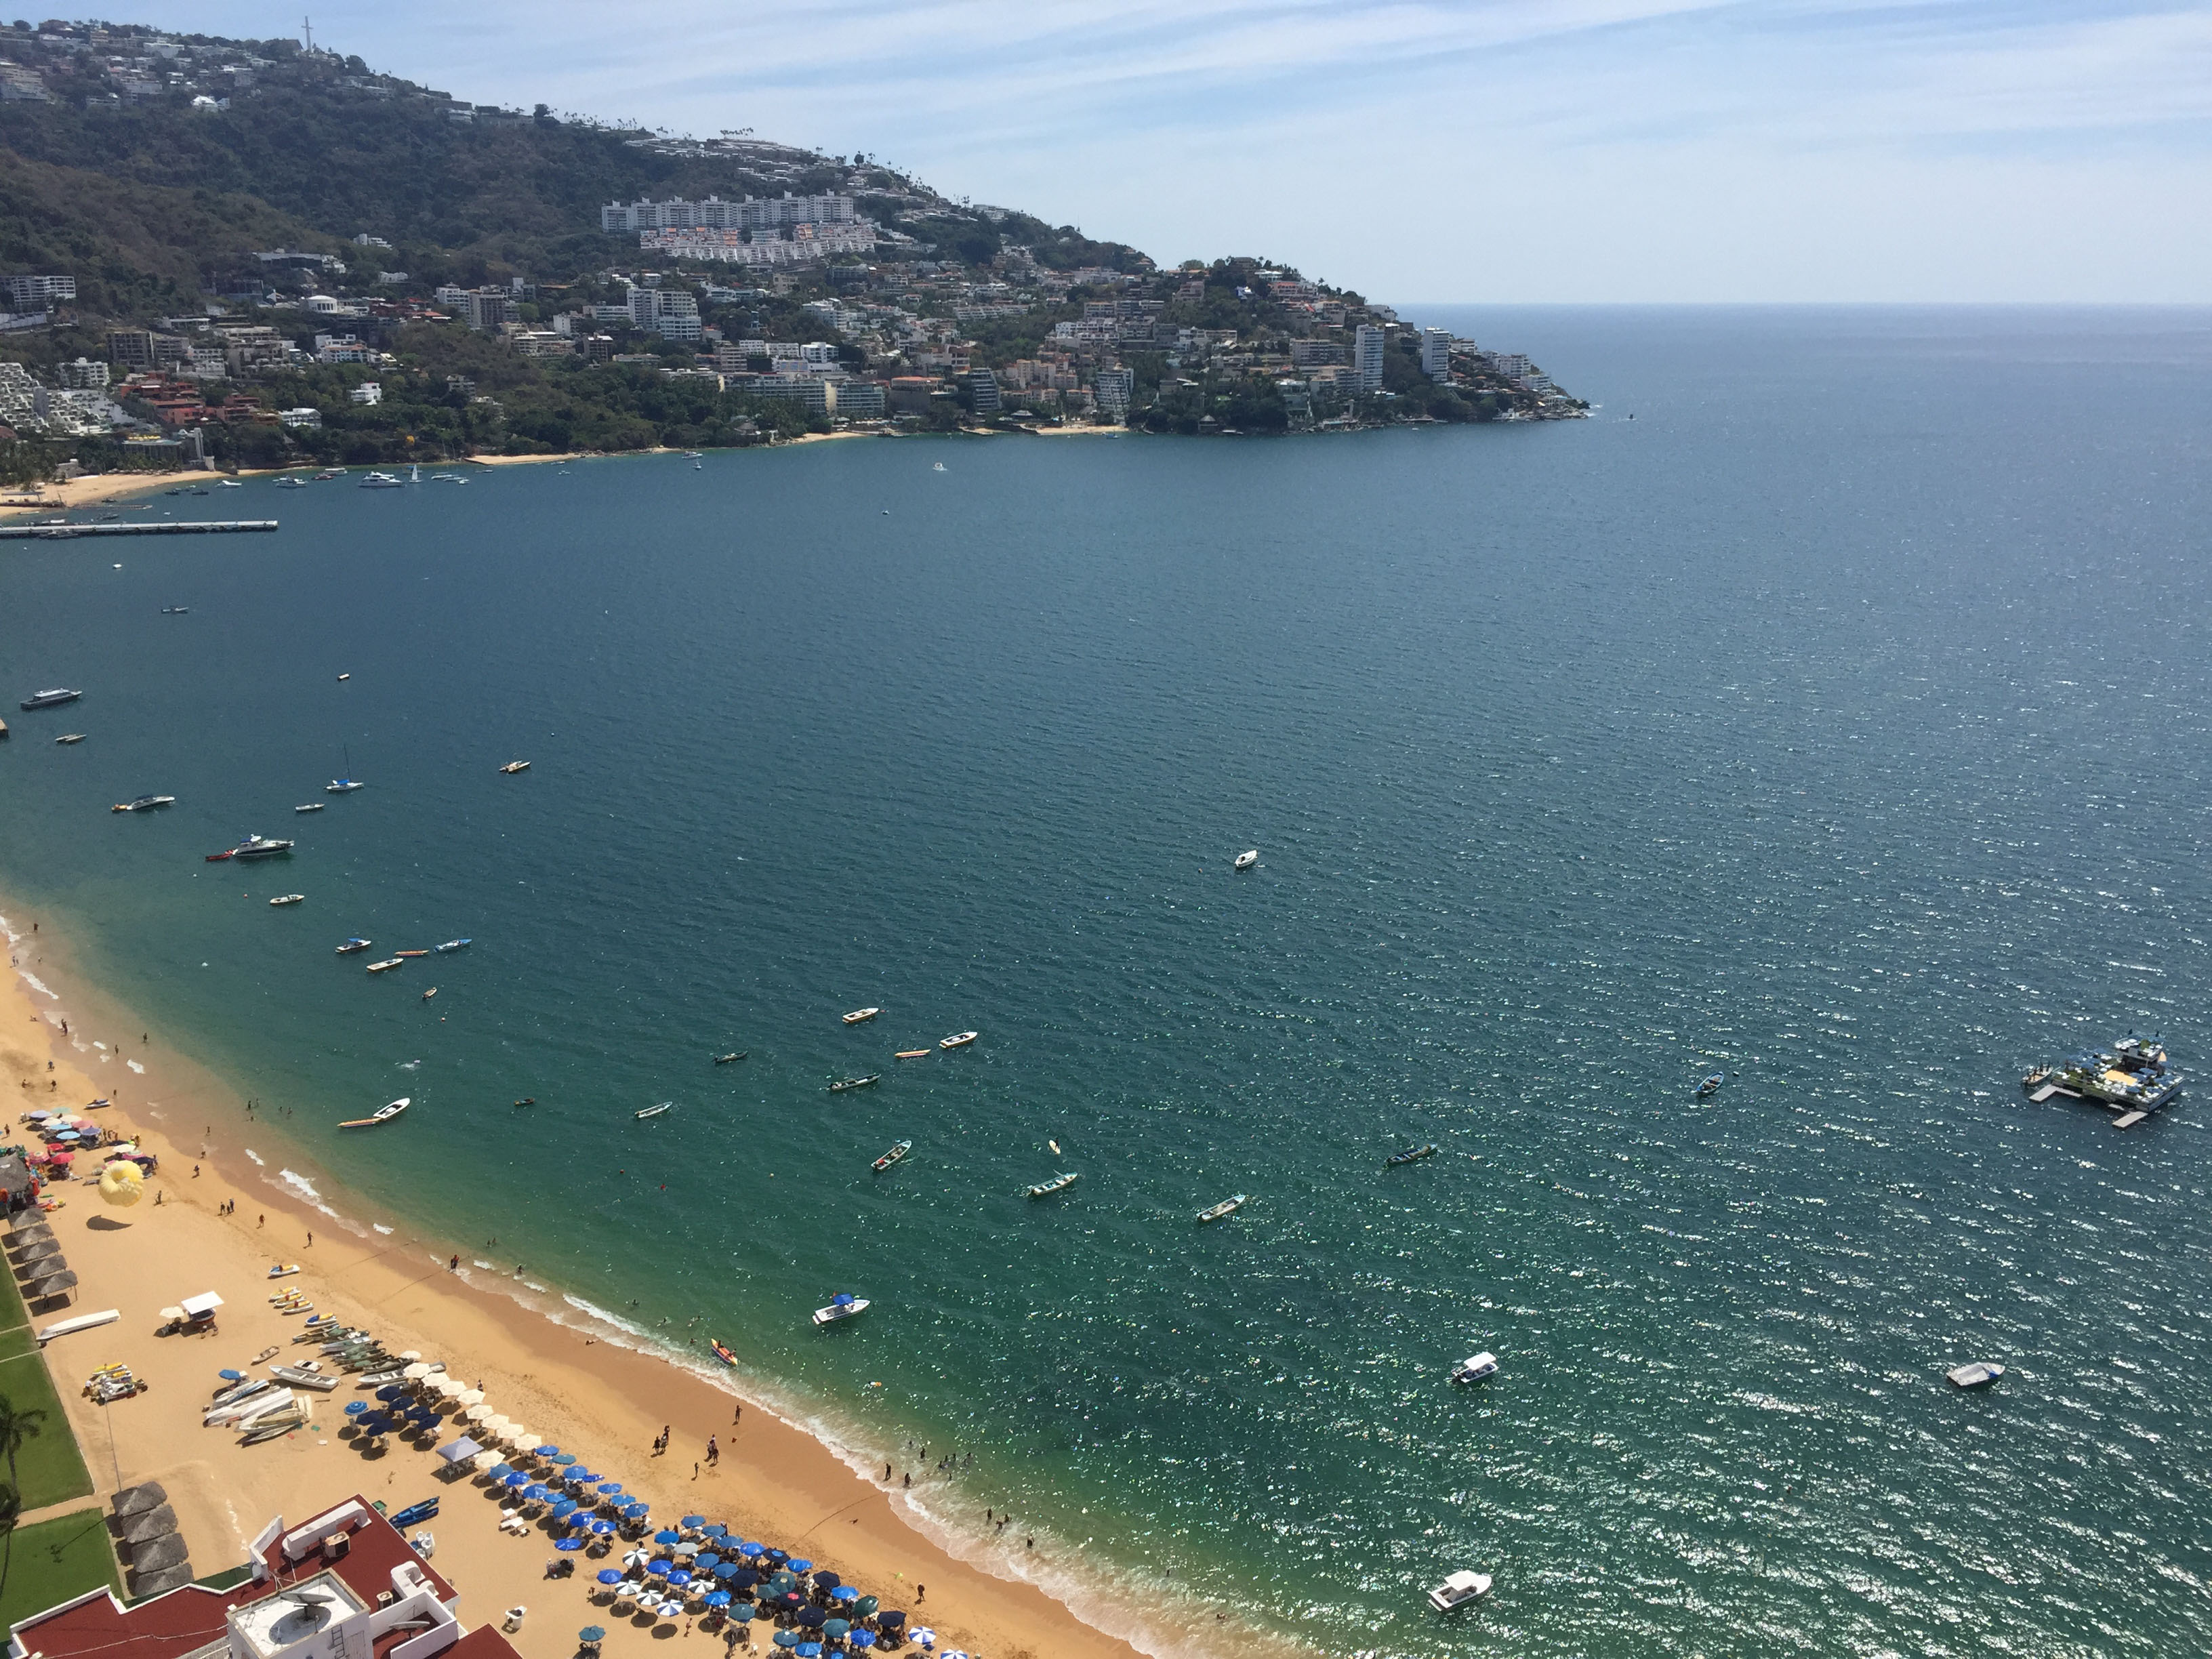 View of Acapulco Bay from 30th floor of La Palapa Acapulco